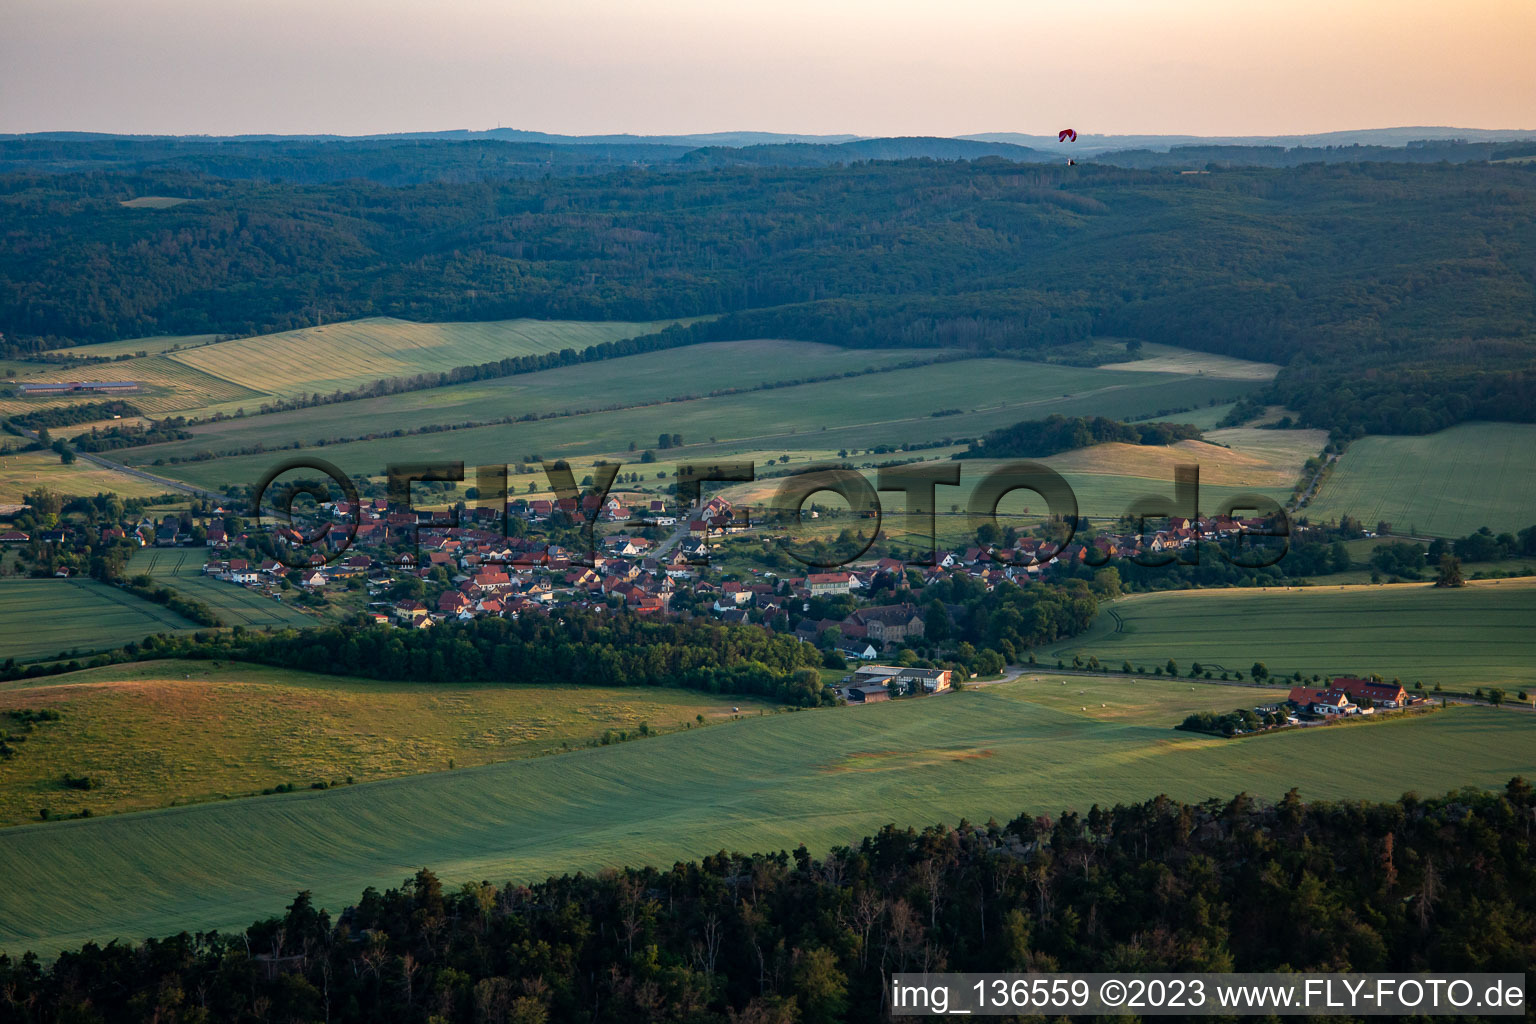 From the north in the district Cattenstedt in Blankenburg in the state Saxony-Anhalt, Germany